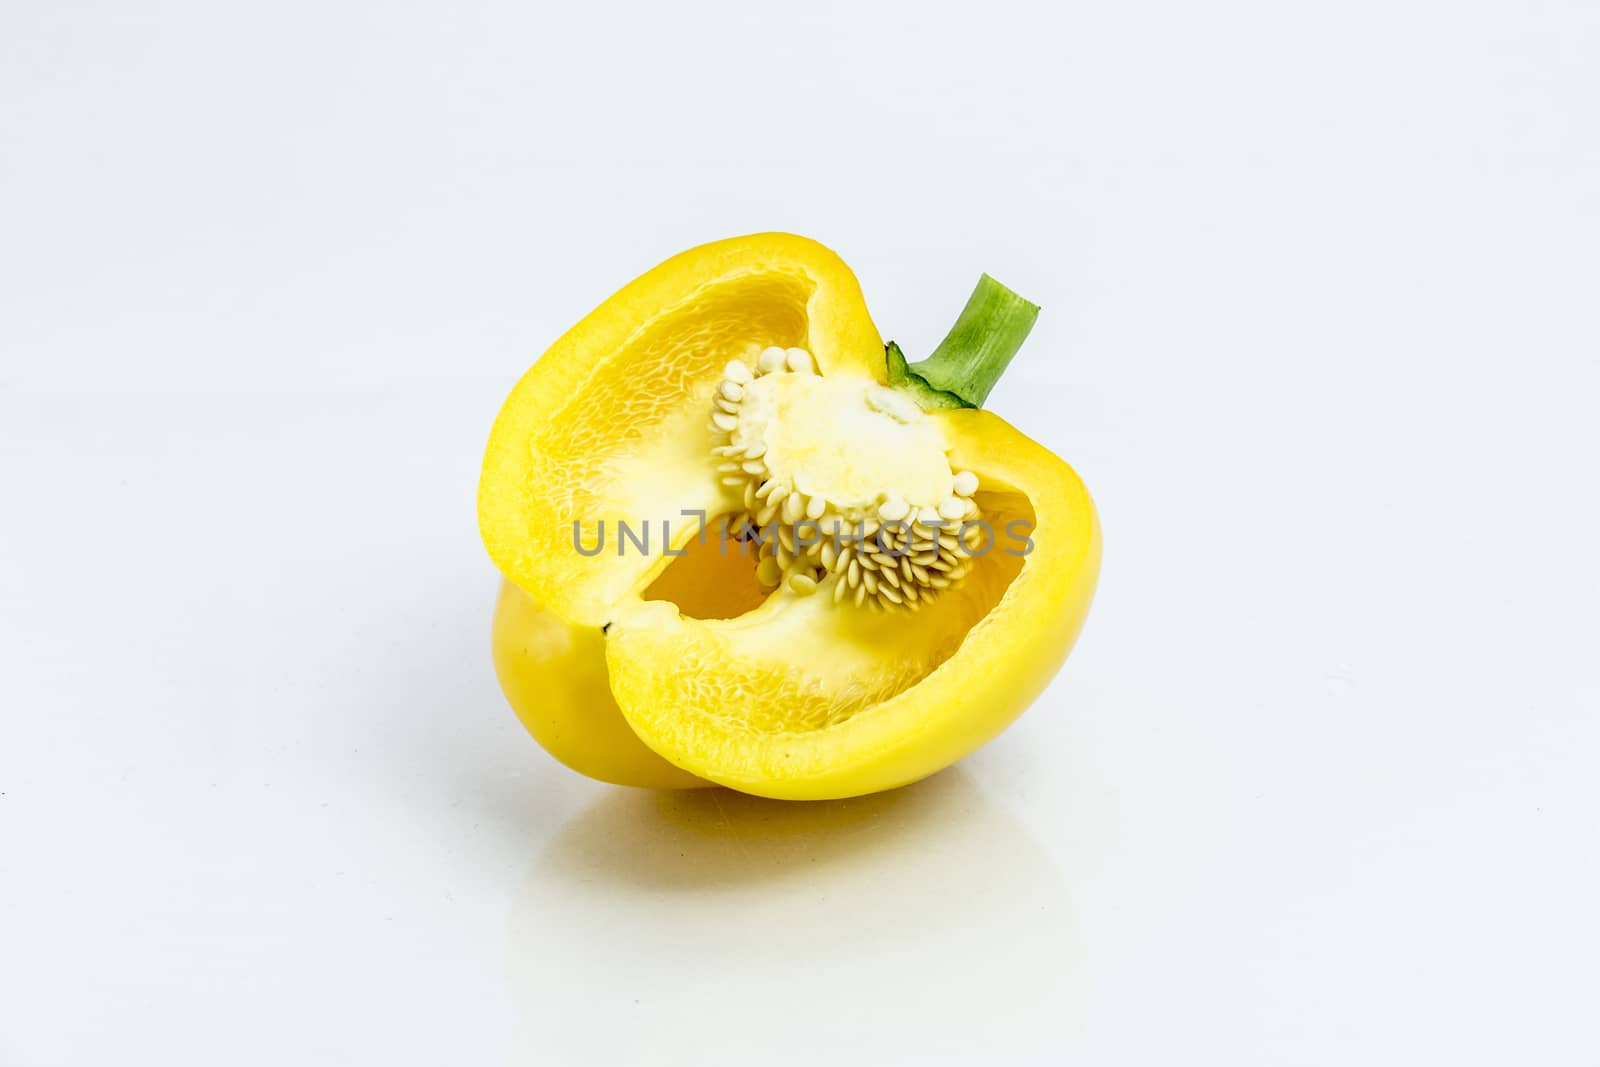 yellow pepper isolated on white background, Homegrown vegetable